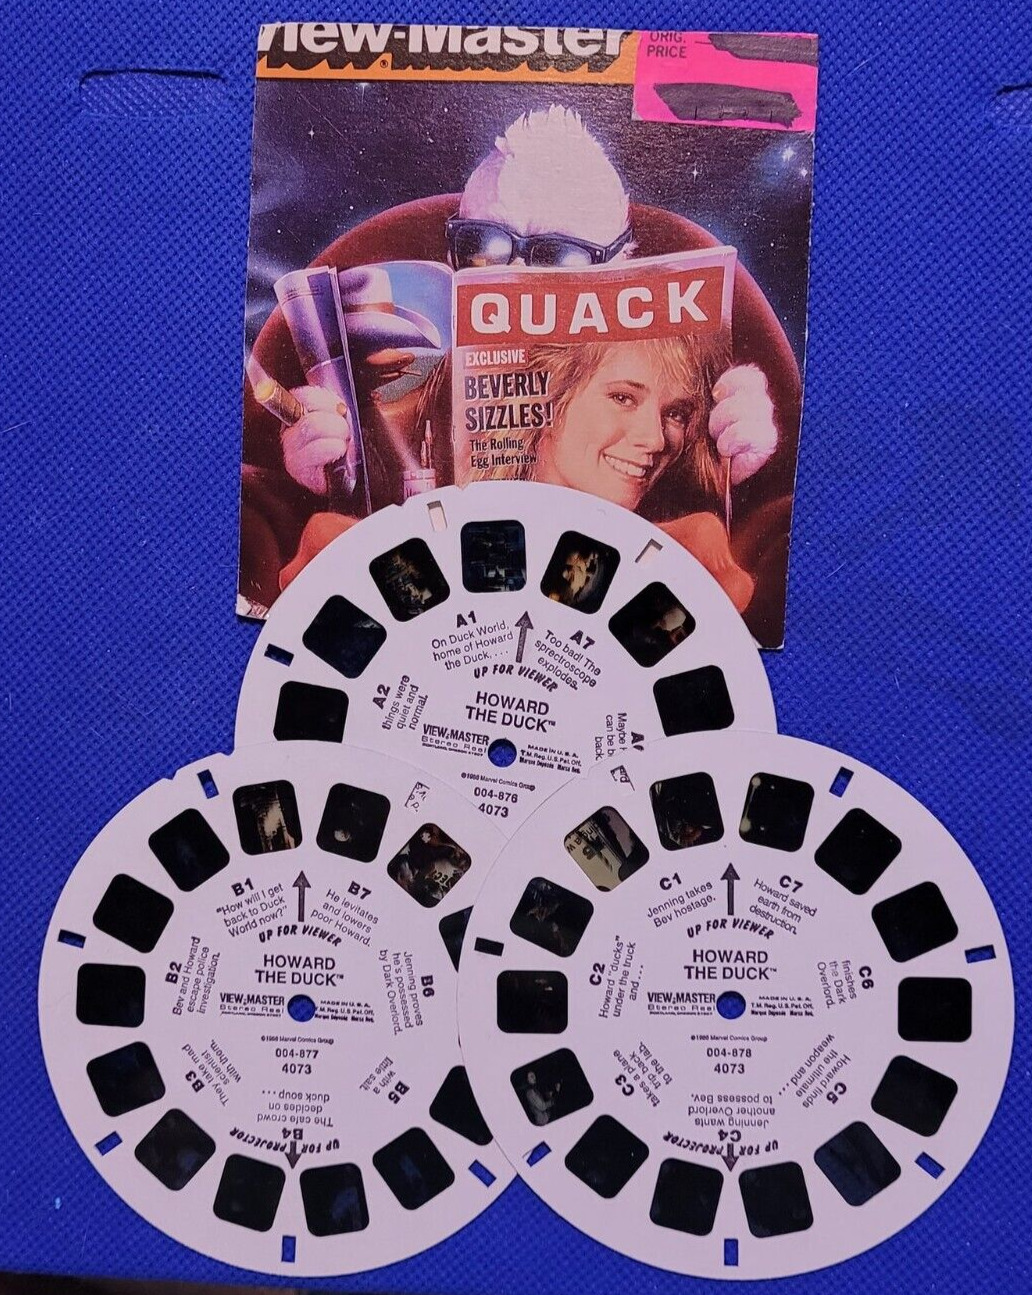 Color Rare Howard the Duck Marvel Comics Movie view-master Reels w/ partial Pack